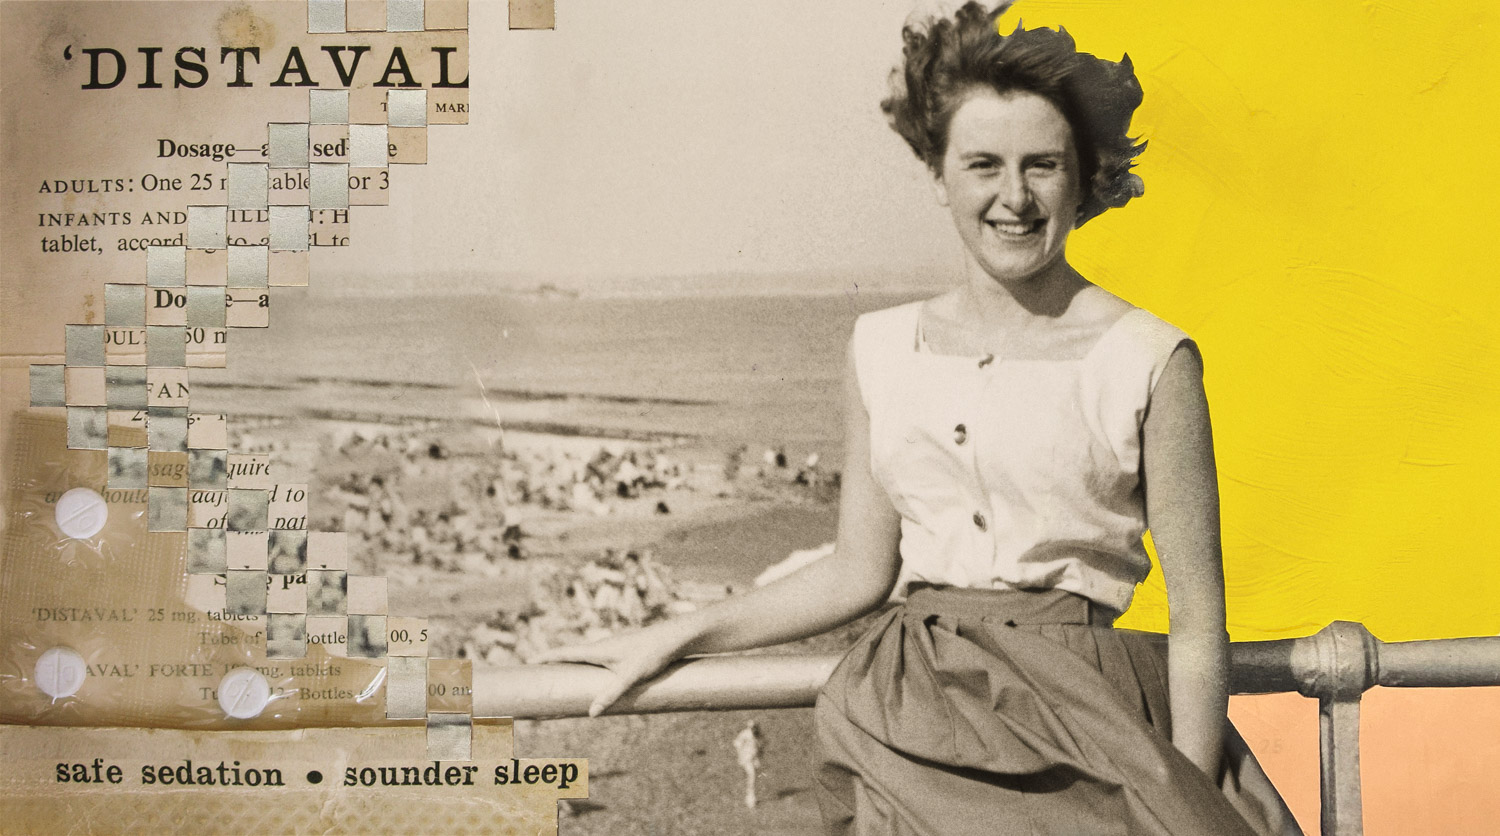 old advert for Distaval drug promoting 'safe sedation, sounder sleep' showing a smiling woman with a beach in the background